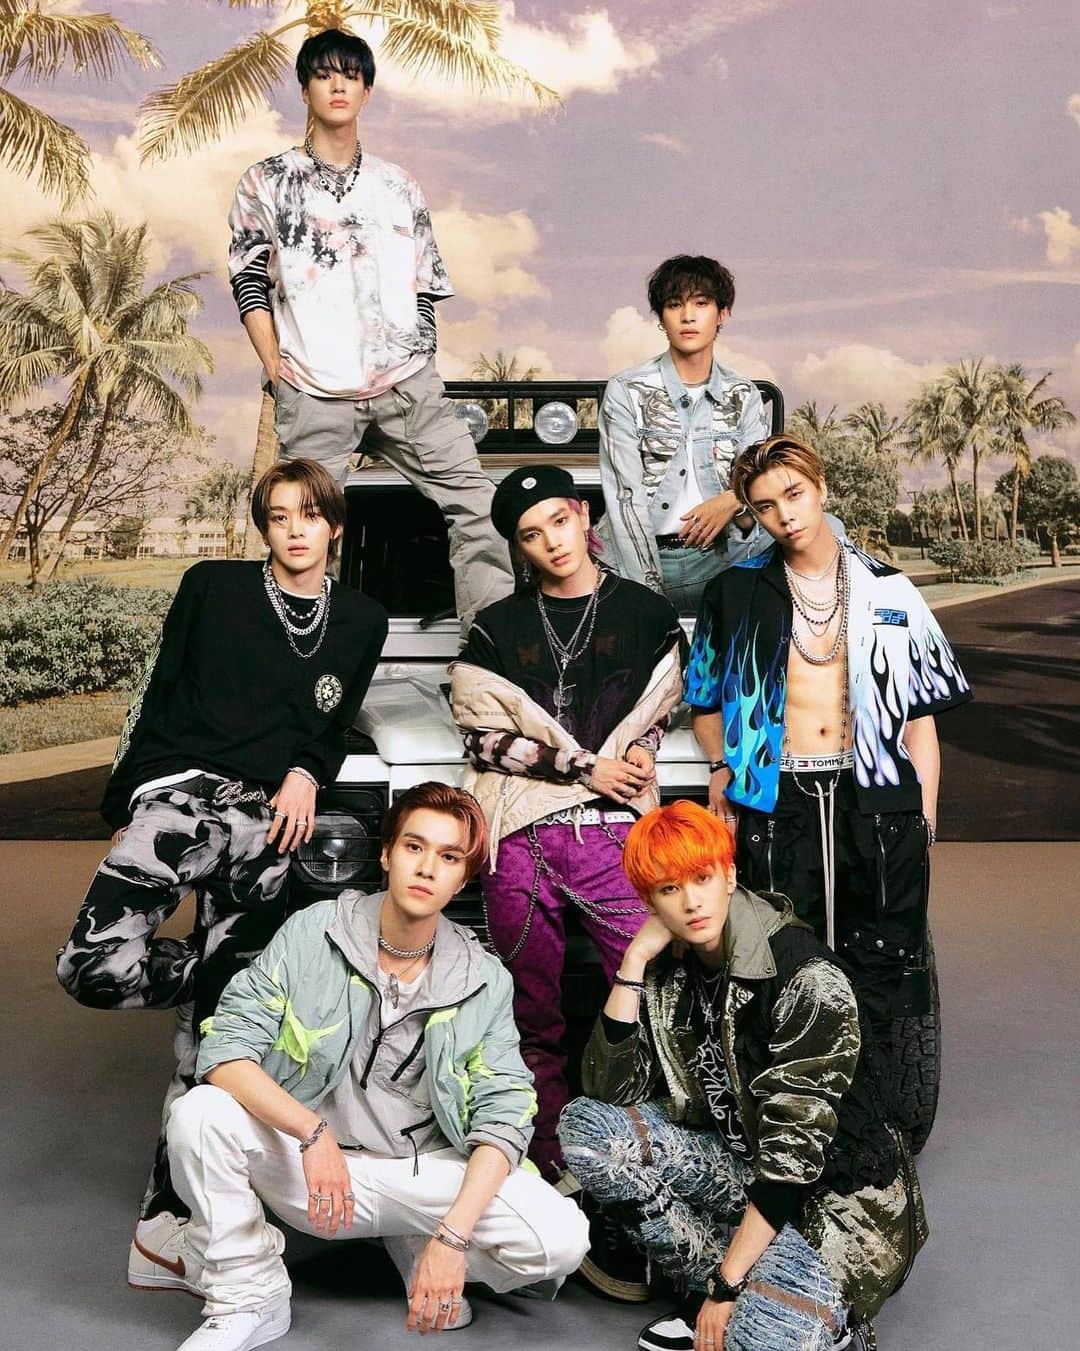 NCT(Neo Culture Technology)のインスタグラム：「"[OFFICIAL] #NCT Misfit 💚" ____________________ #JENO #SUNGCHAN #YANGYANG #TAEYONG #JOHNNY #HENDERY #MARK #NCT127 #NCTdream #WayV #NCT2020 #RESONANCE #RESONANCE_Pt1 #NCT2020_RESONANCE」